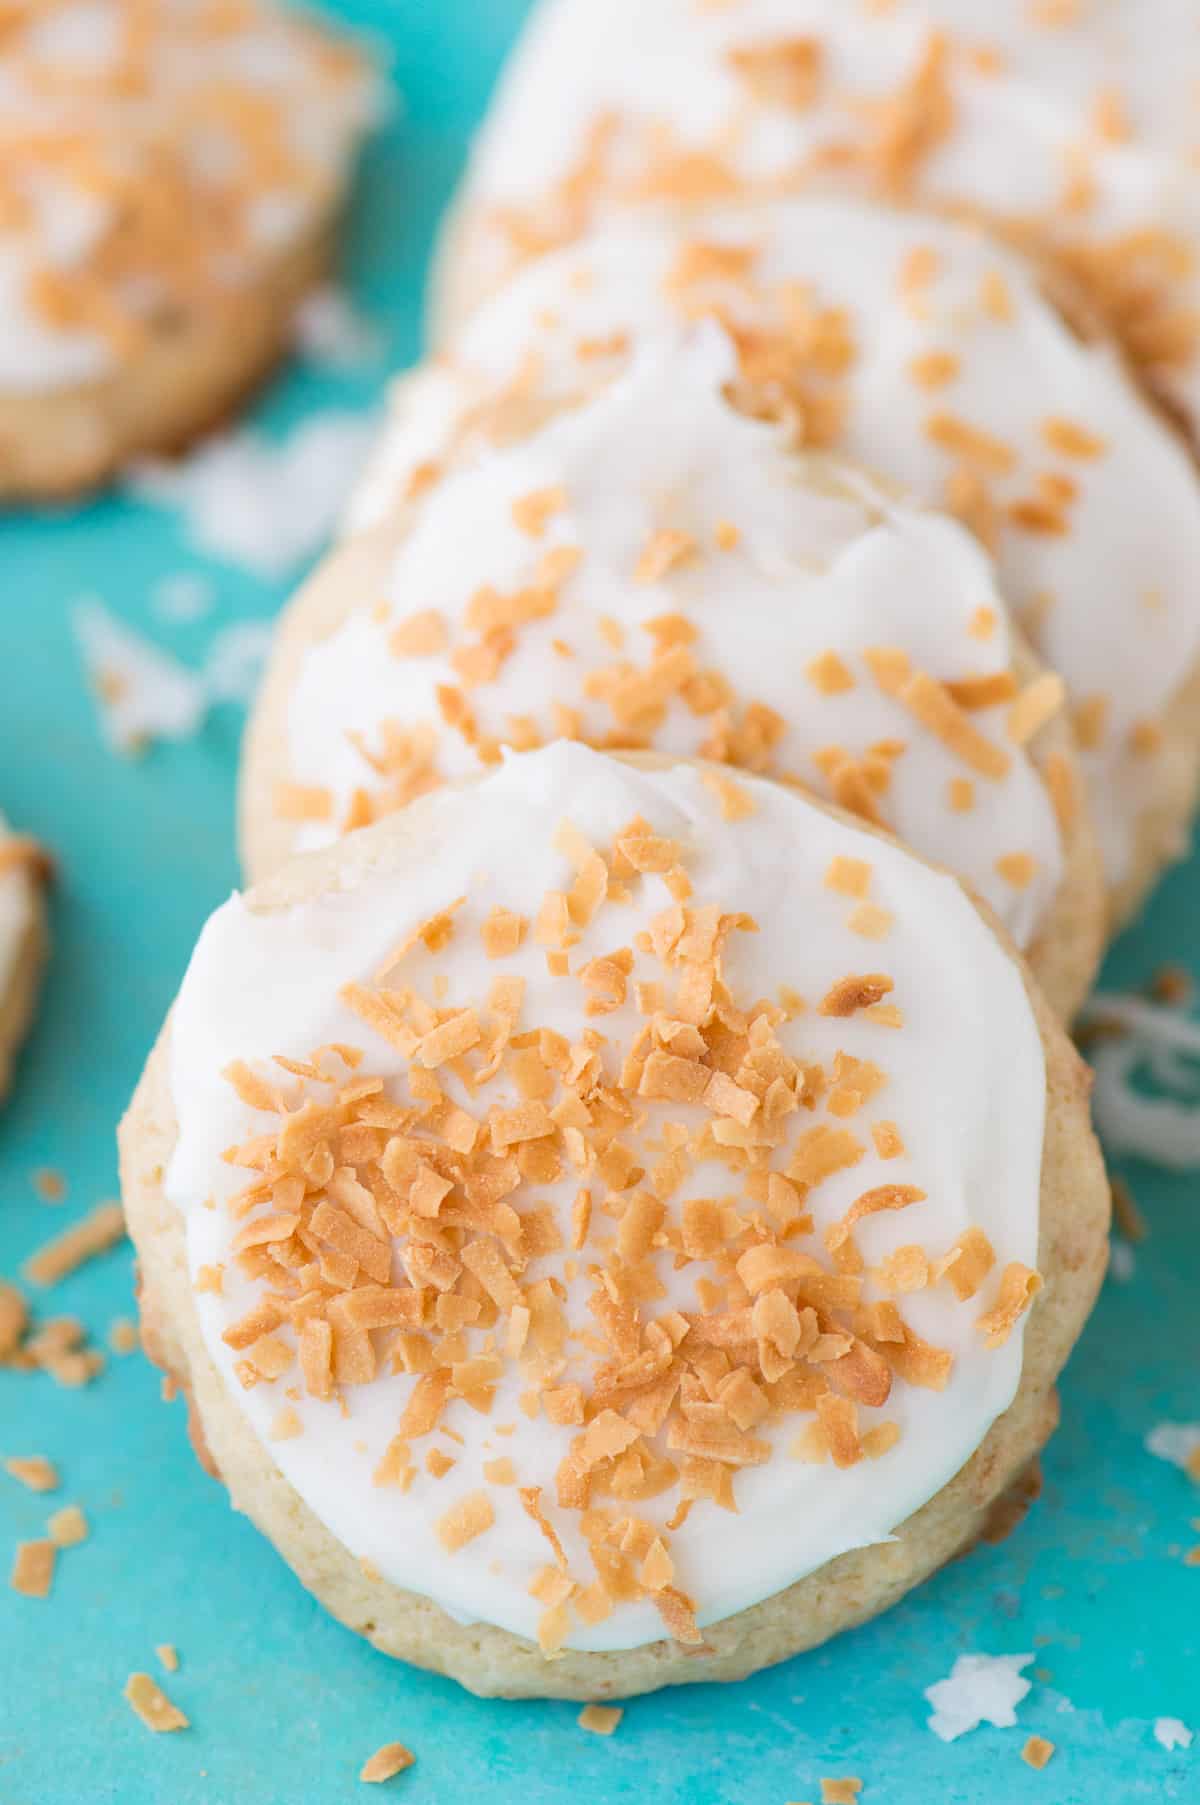 coconut cookies with white frosting on teal background